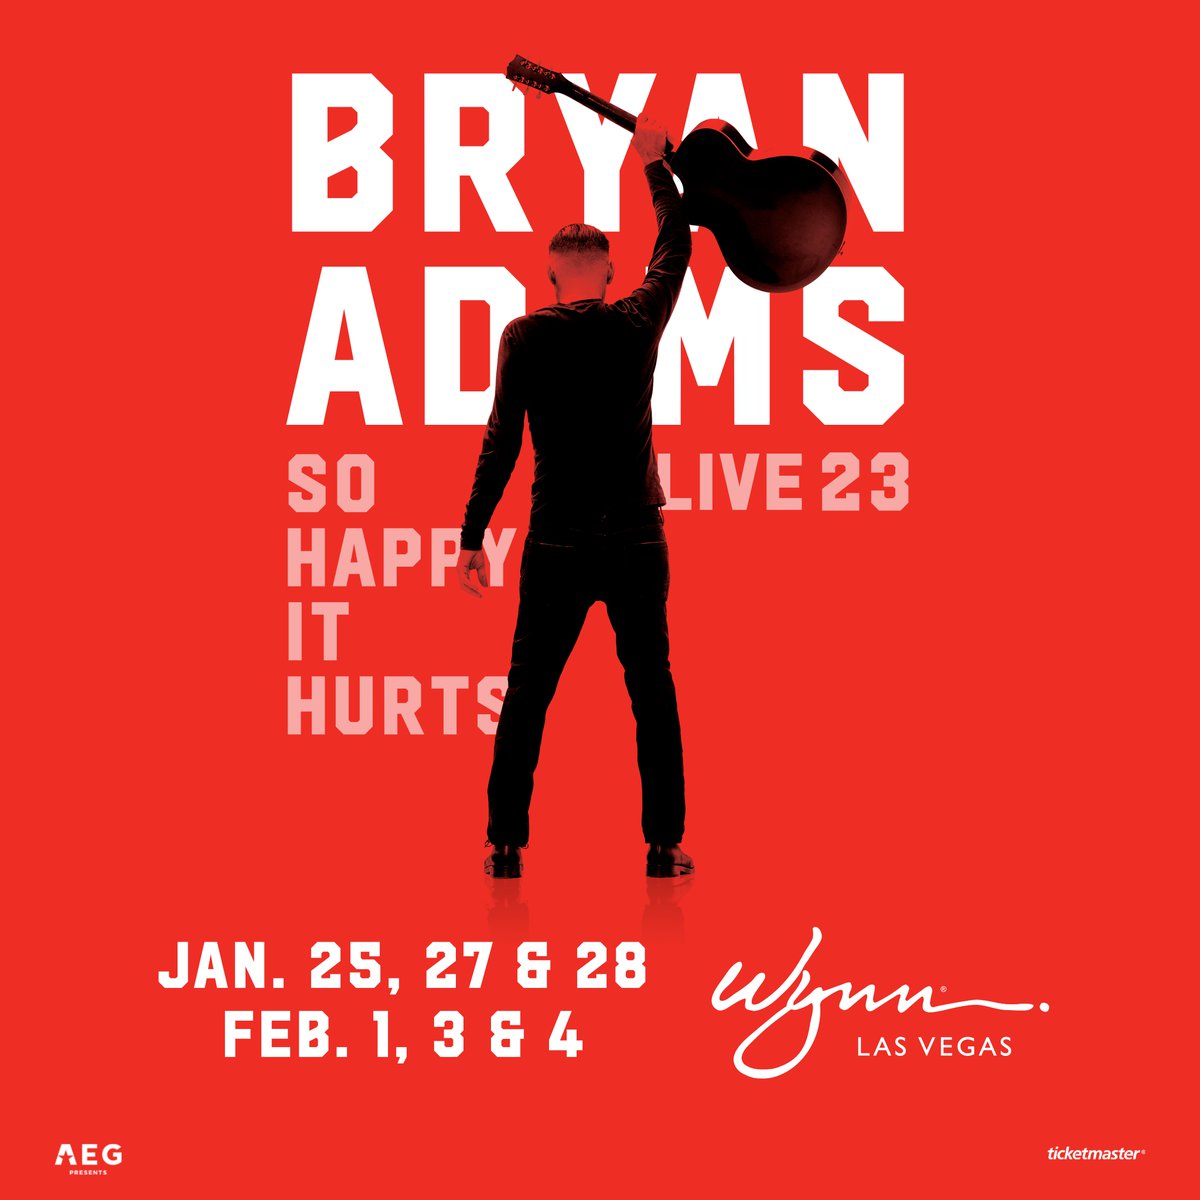 Bryan returns to the @WynnLasVegas for six nights this January! Tickets on sale TODAY at 10am! bit.ly/BAVEGAS2023 #Vegas #SoHappyItHurts